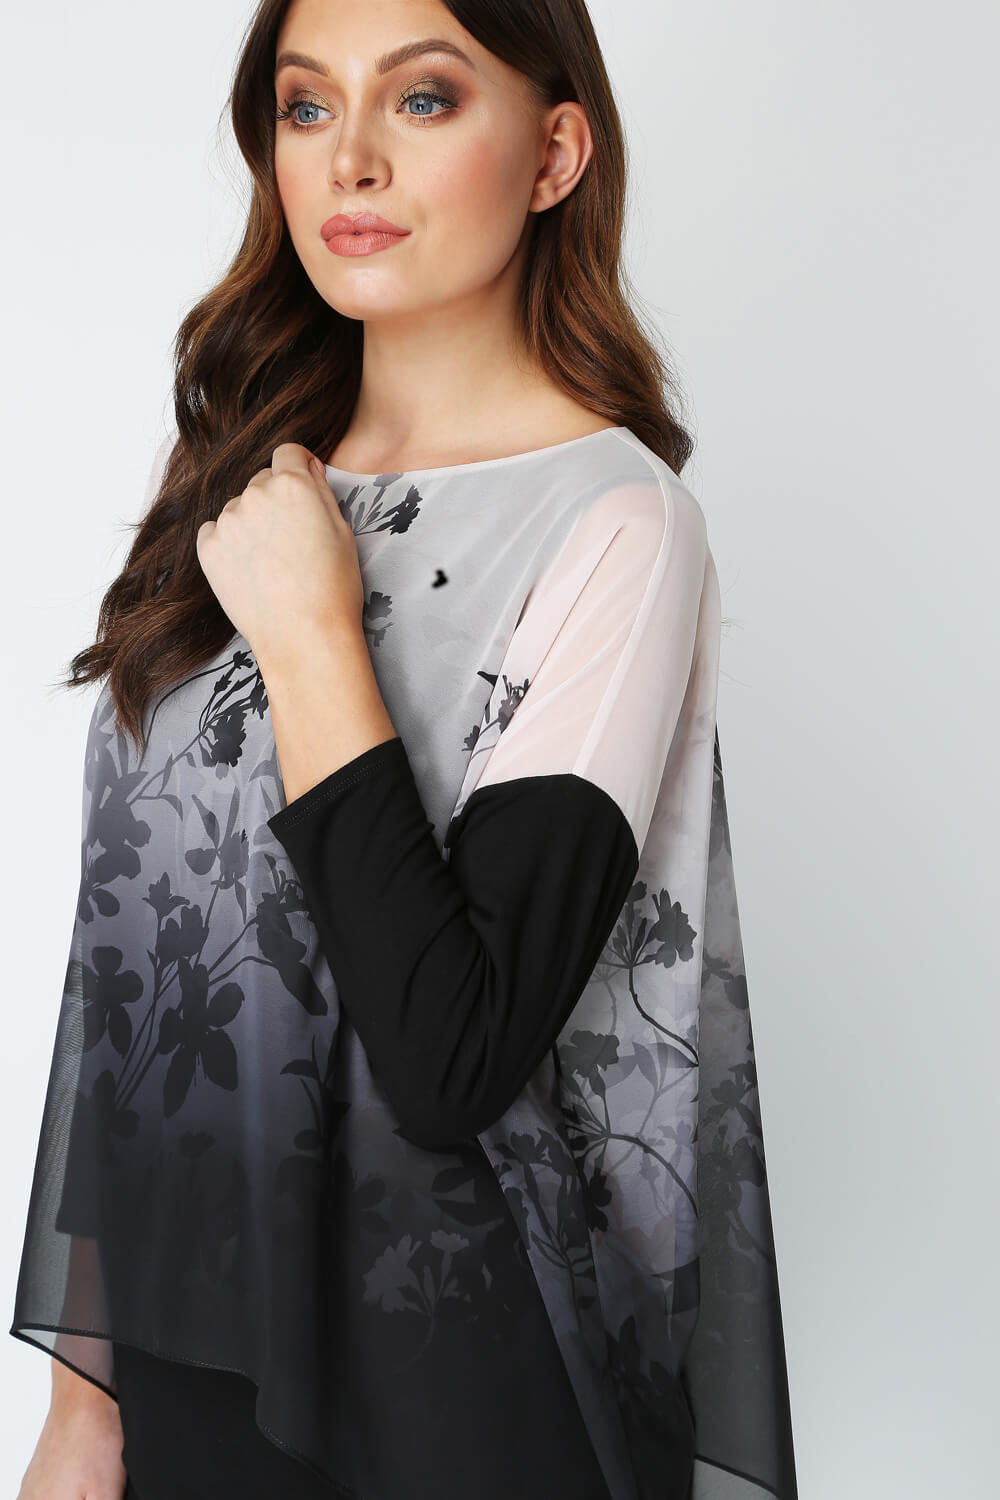 Black Soft Floral Overlay Chiffon Top, Image 2 of 5